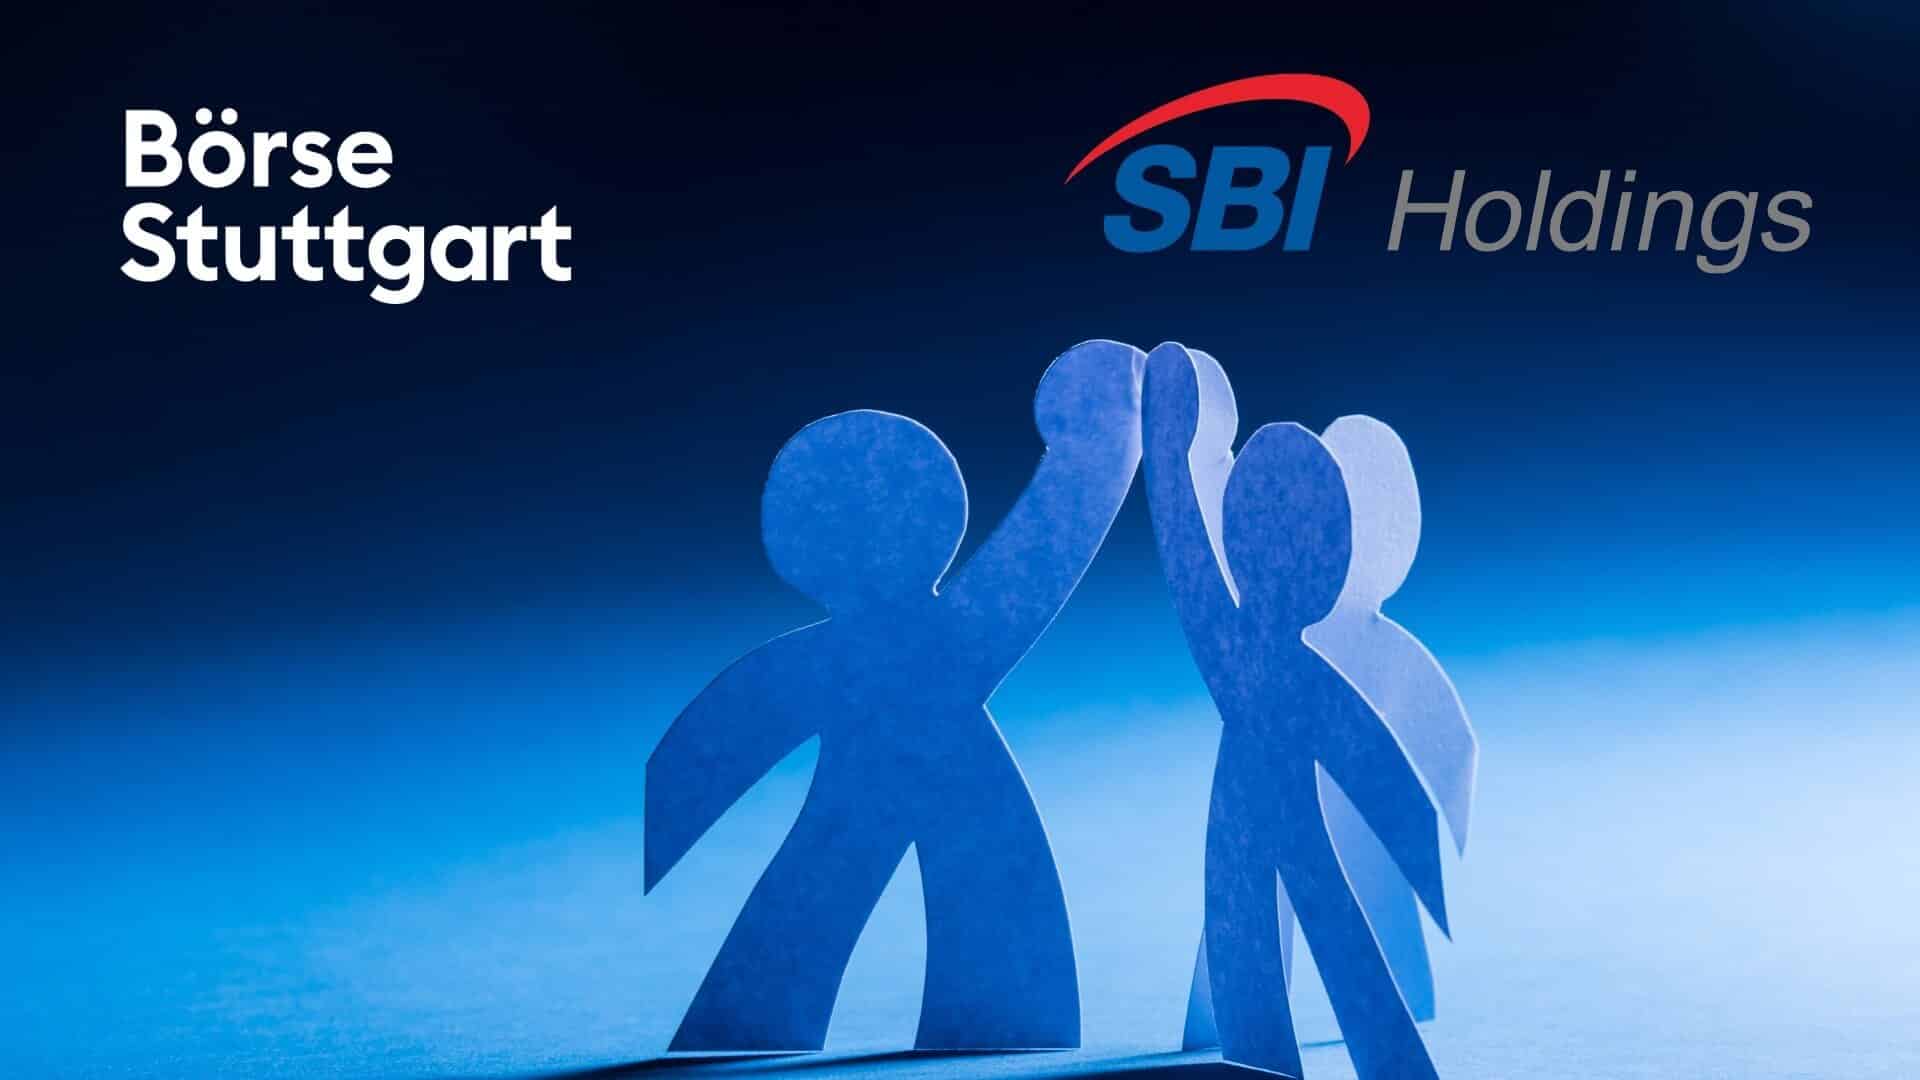 Japan’s SBI and Boerse Stuttgart Team Up to Bring More Crypto Services in Asia and Europe